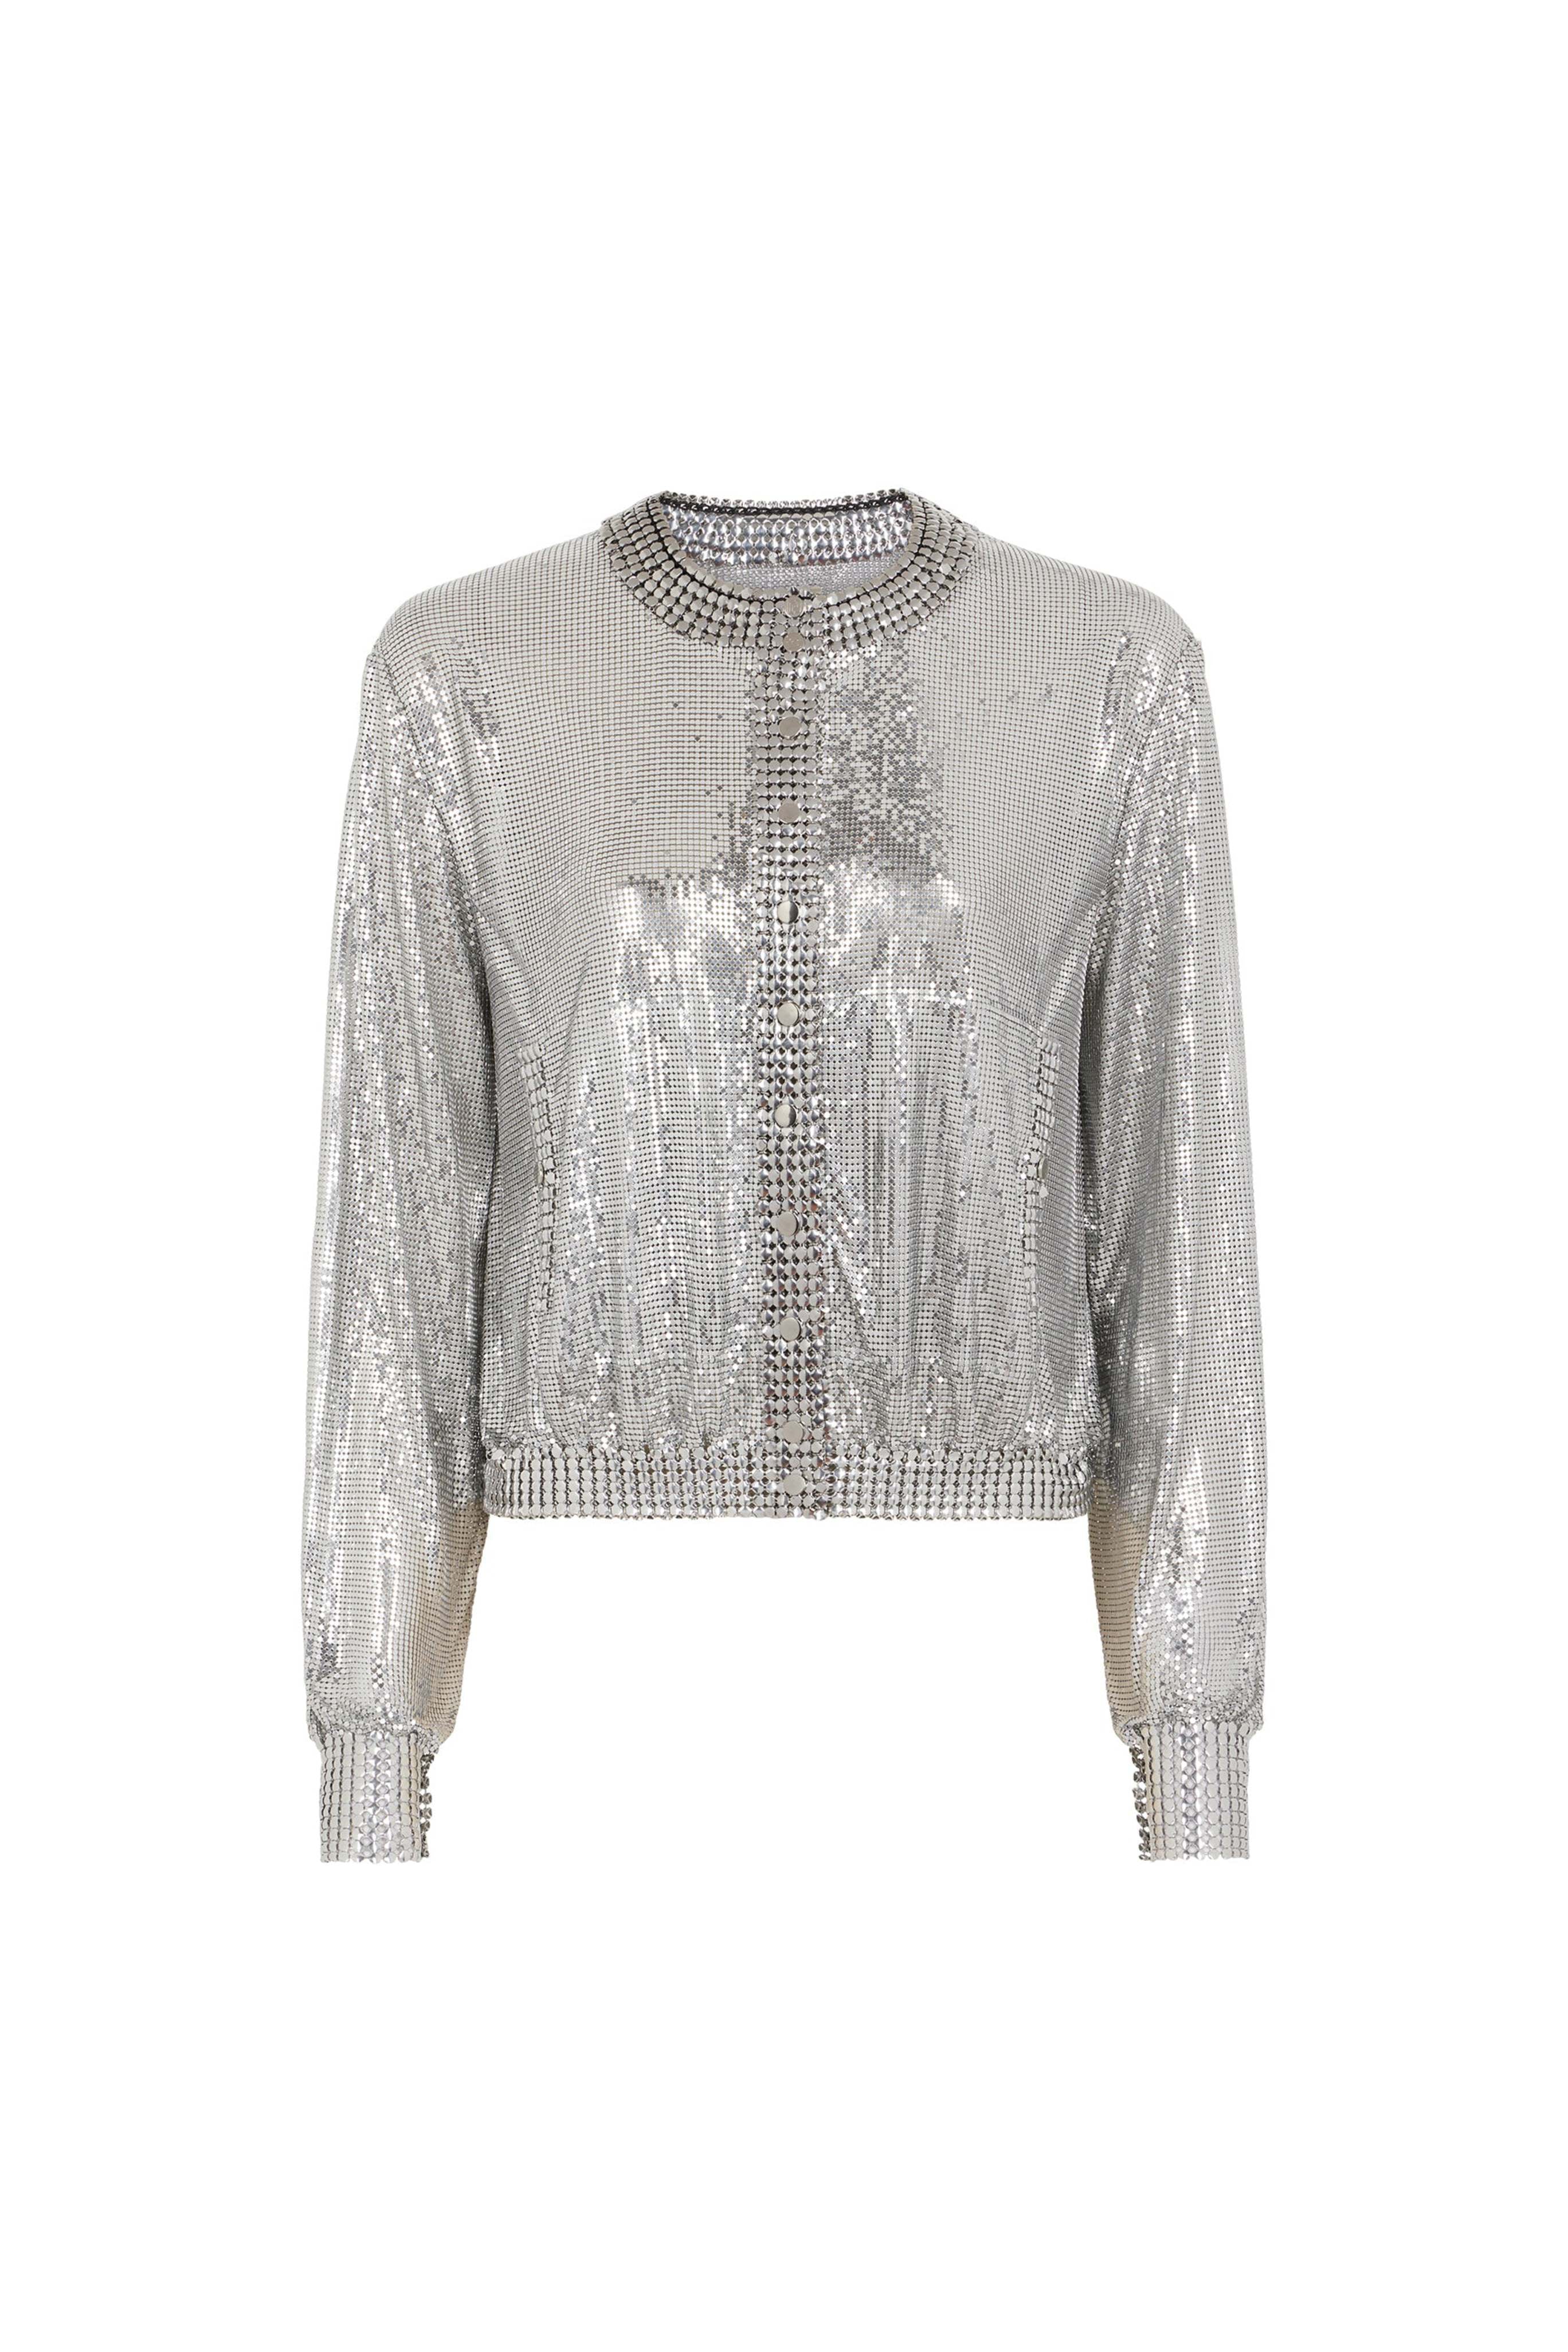 Silver Chainmail Bomber Jacket